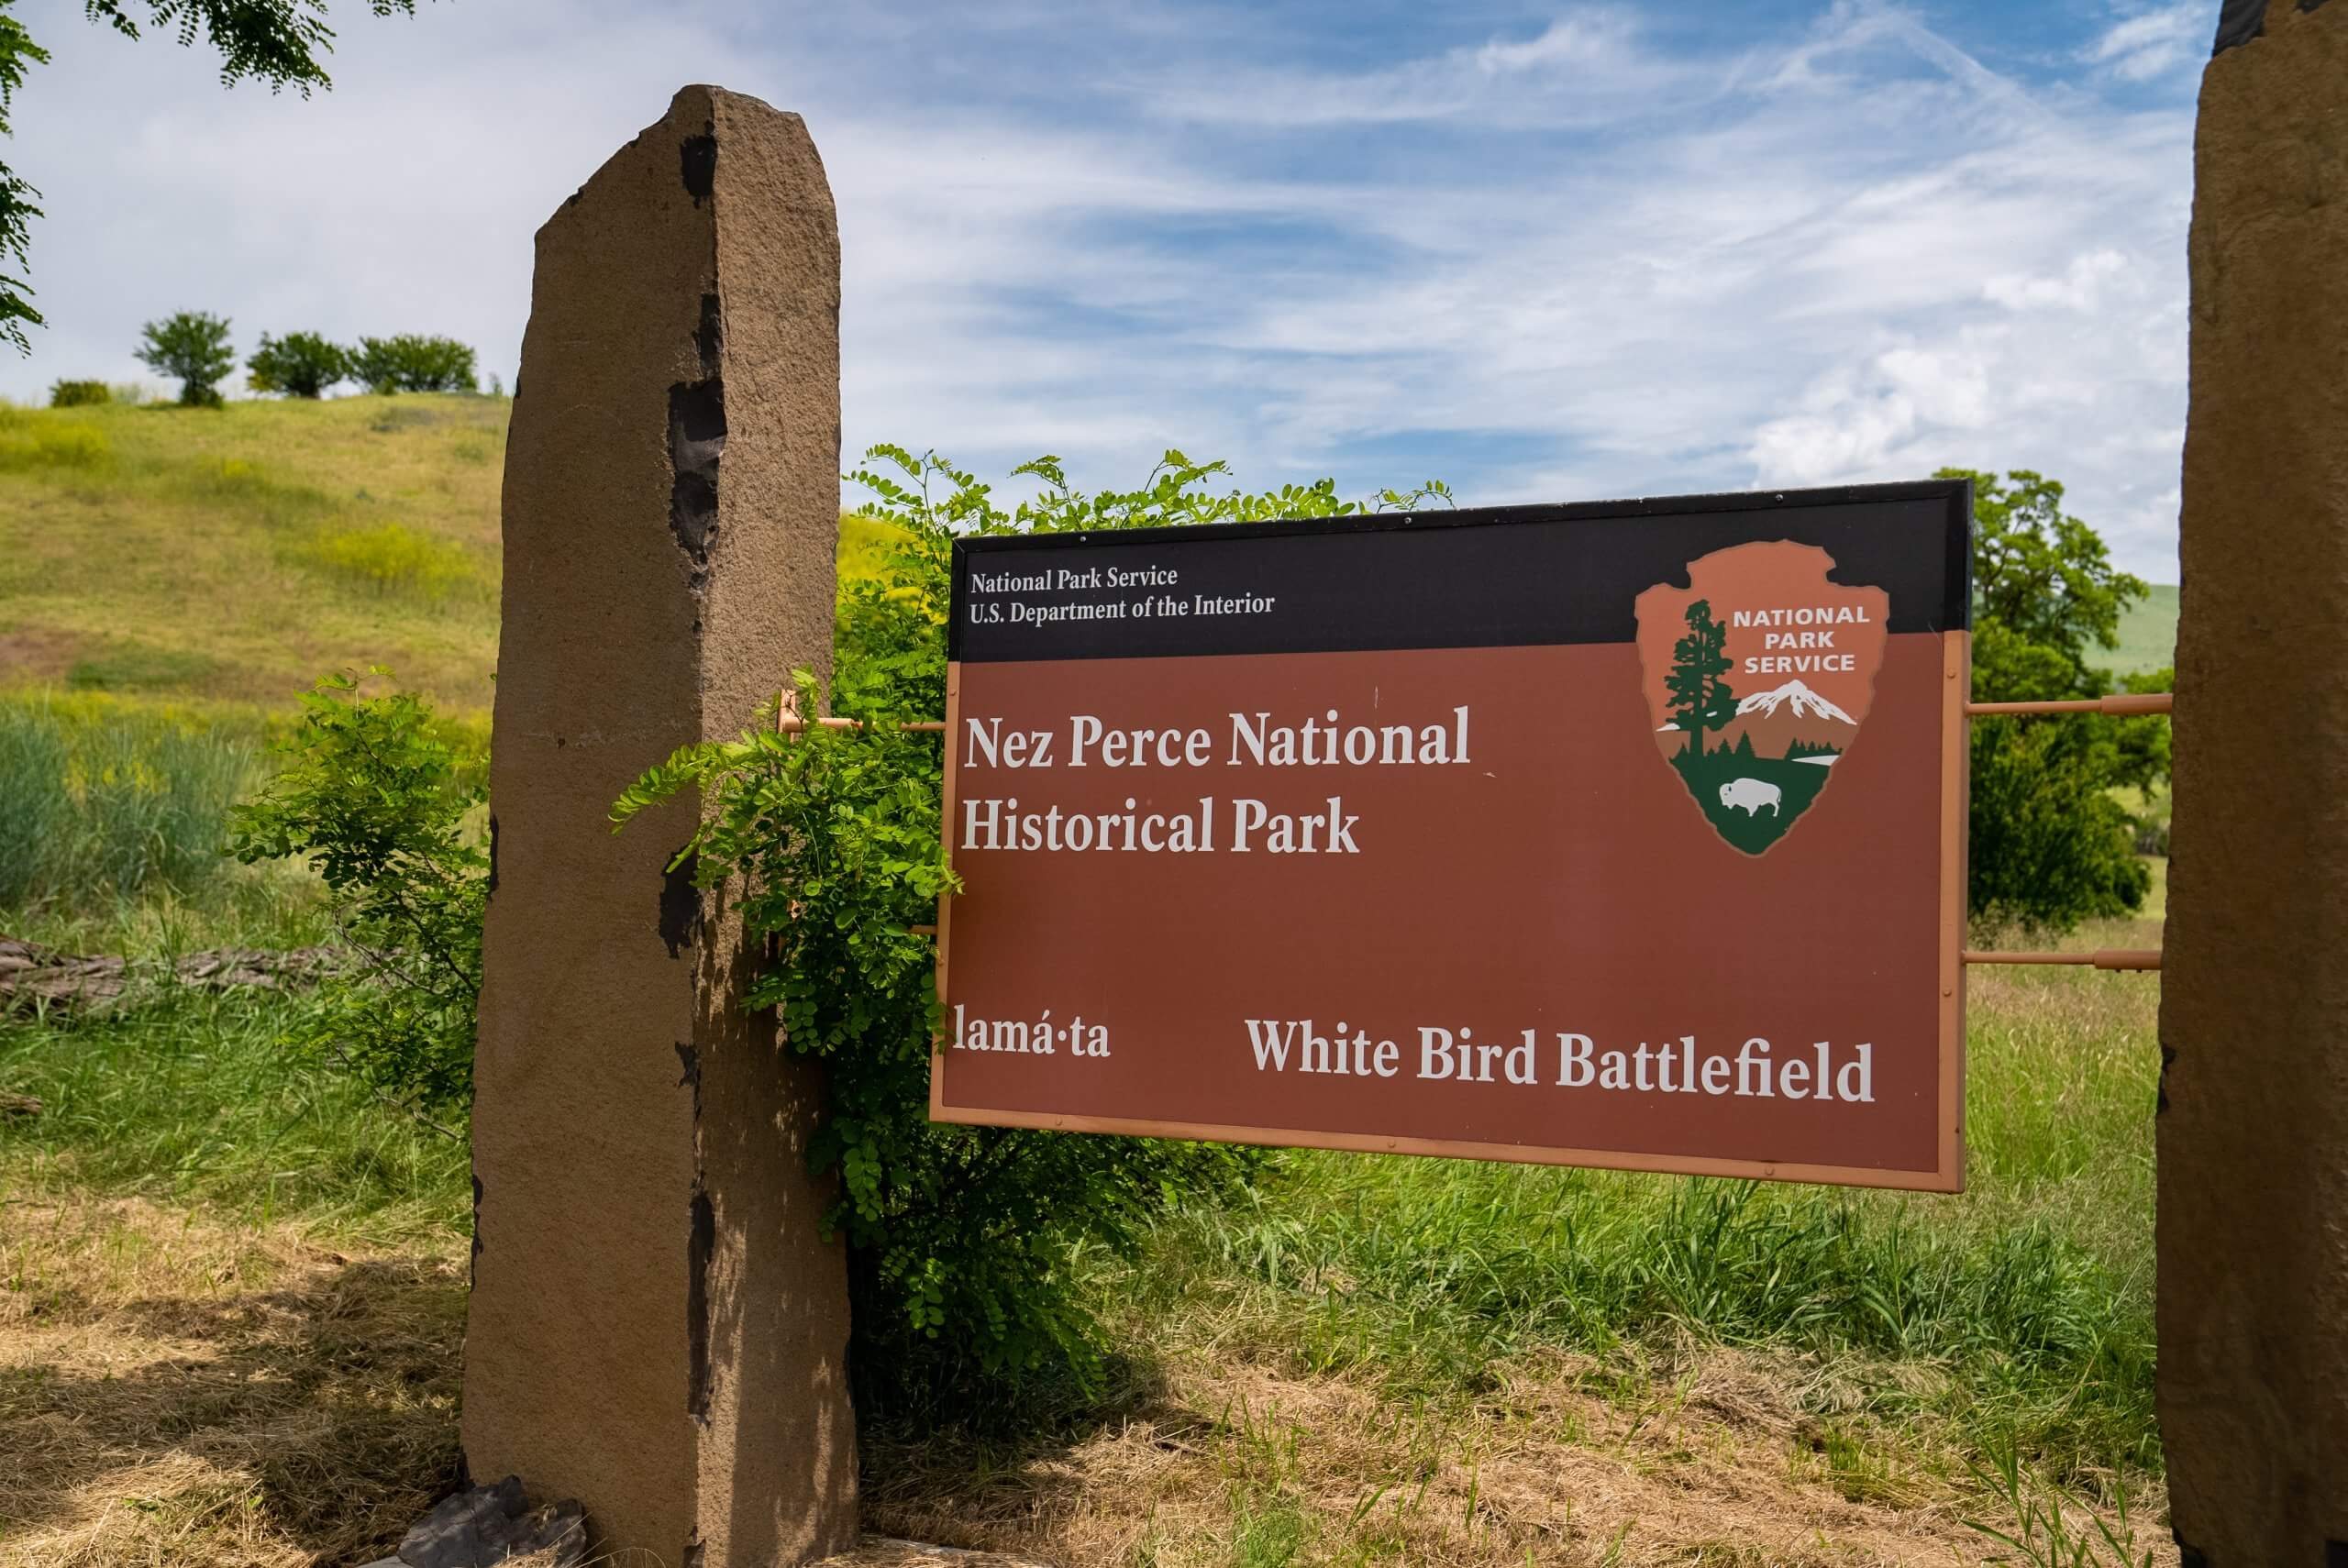 Signage marking the entrance to the White Bird Battlefield in Nez Perce National Historical Park.